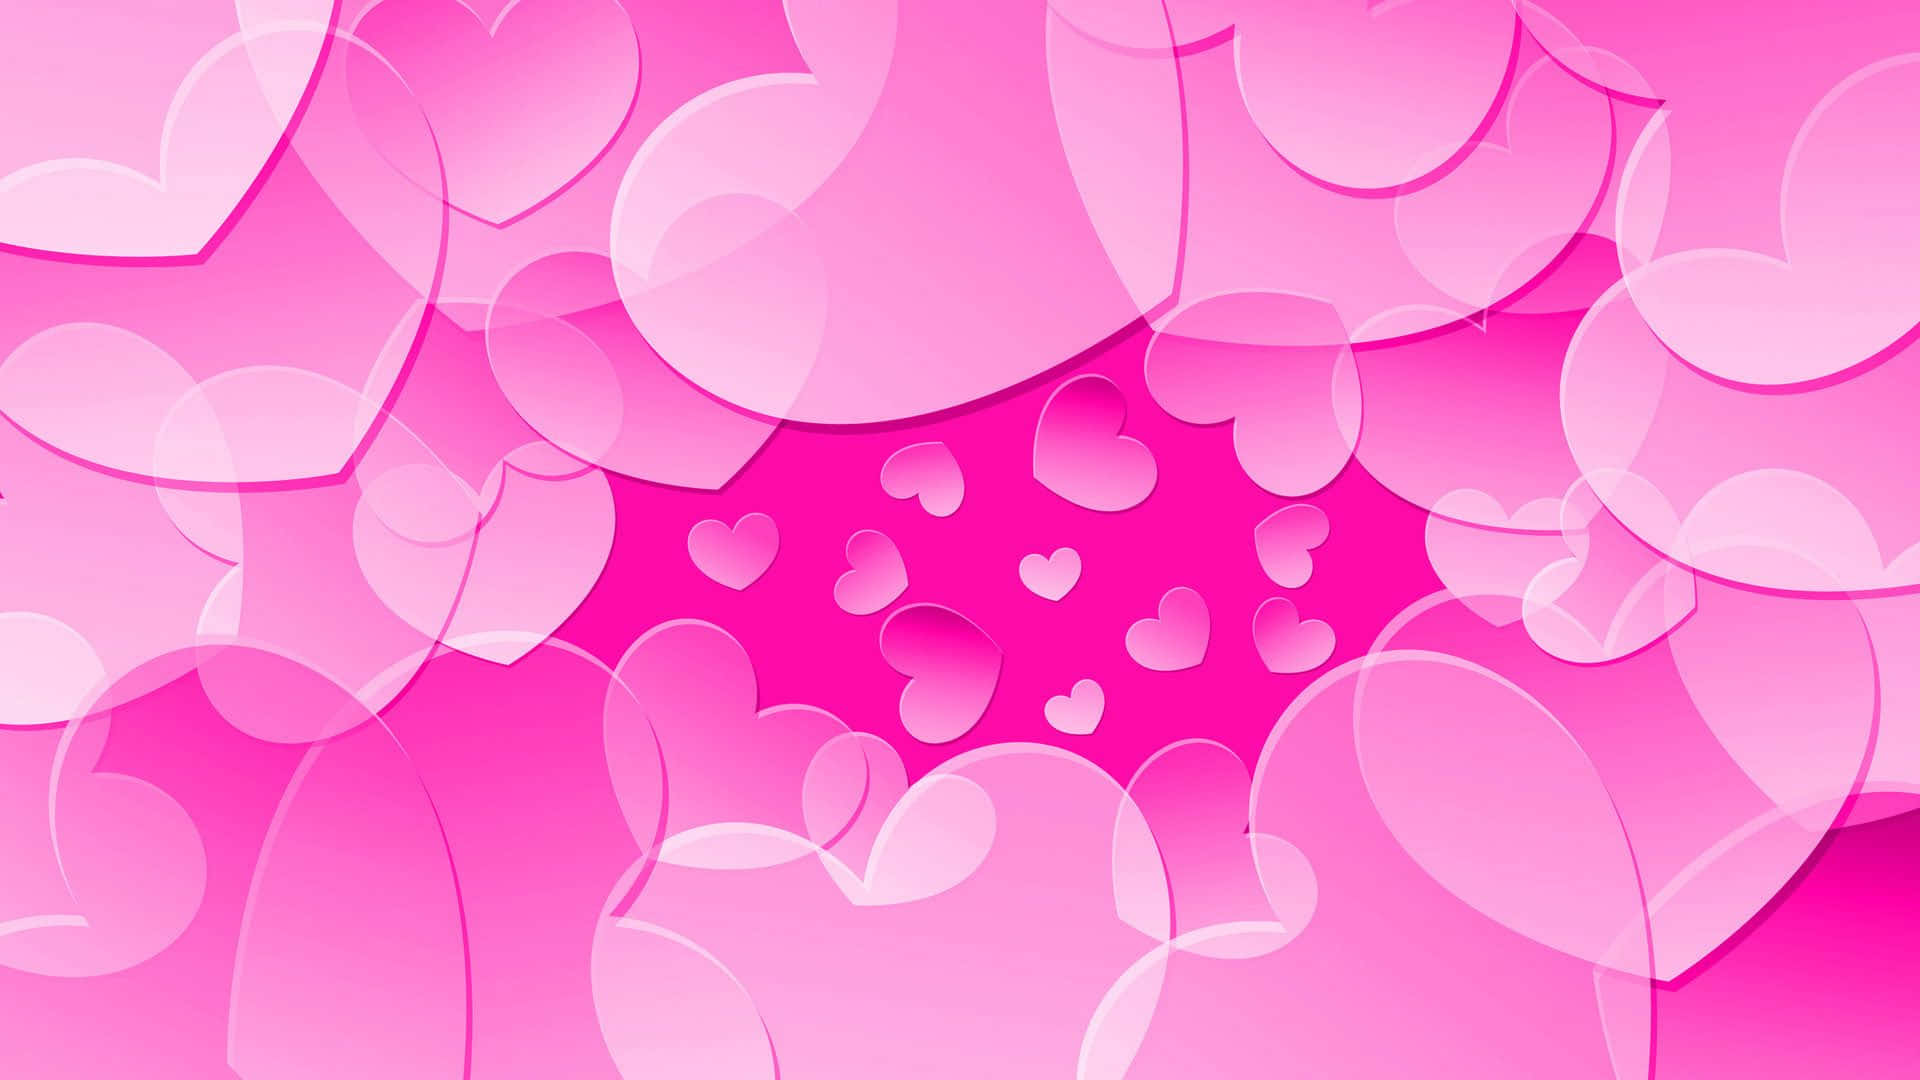 Download White and pink flower petal texture background | Wallpapers.com